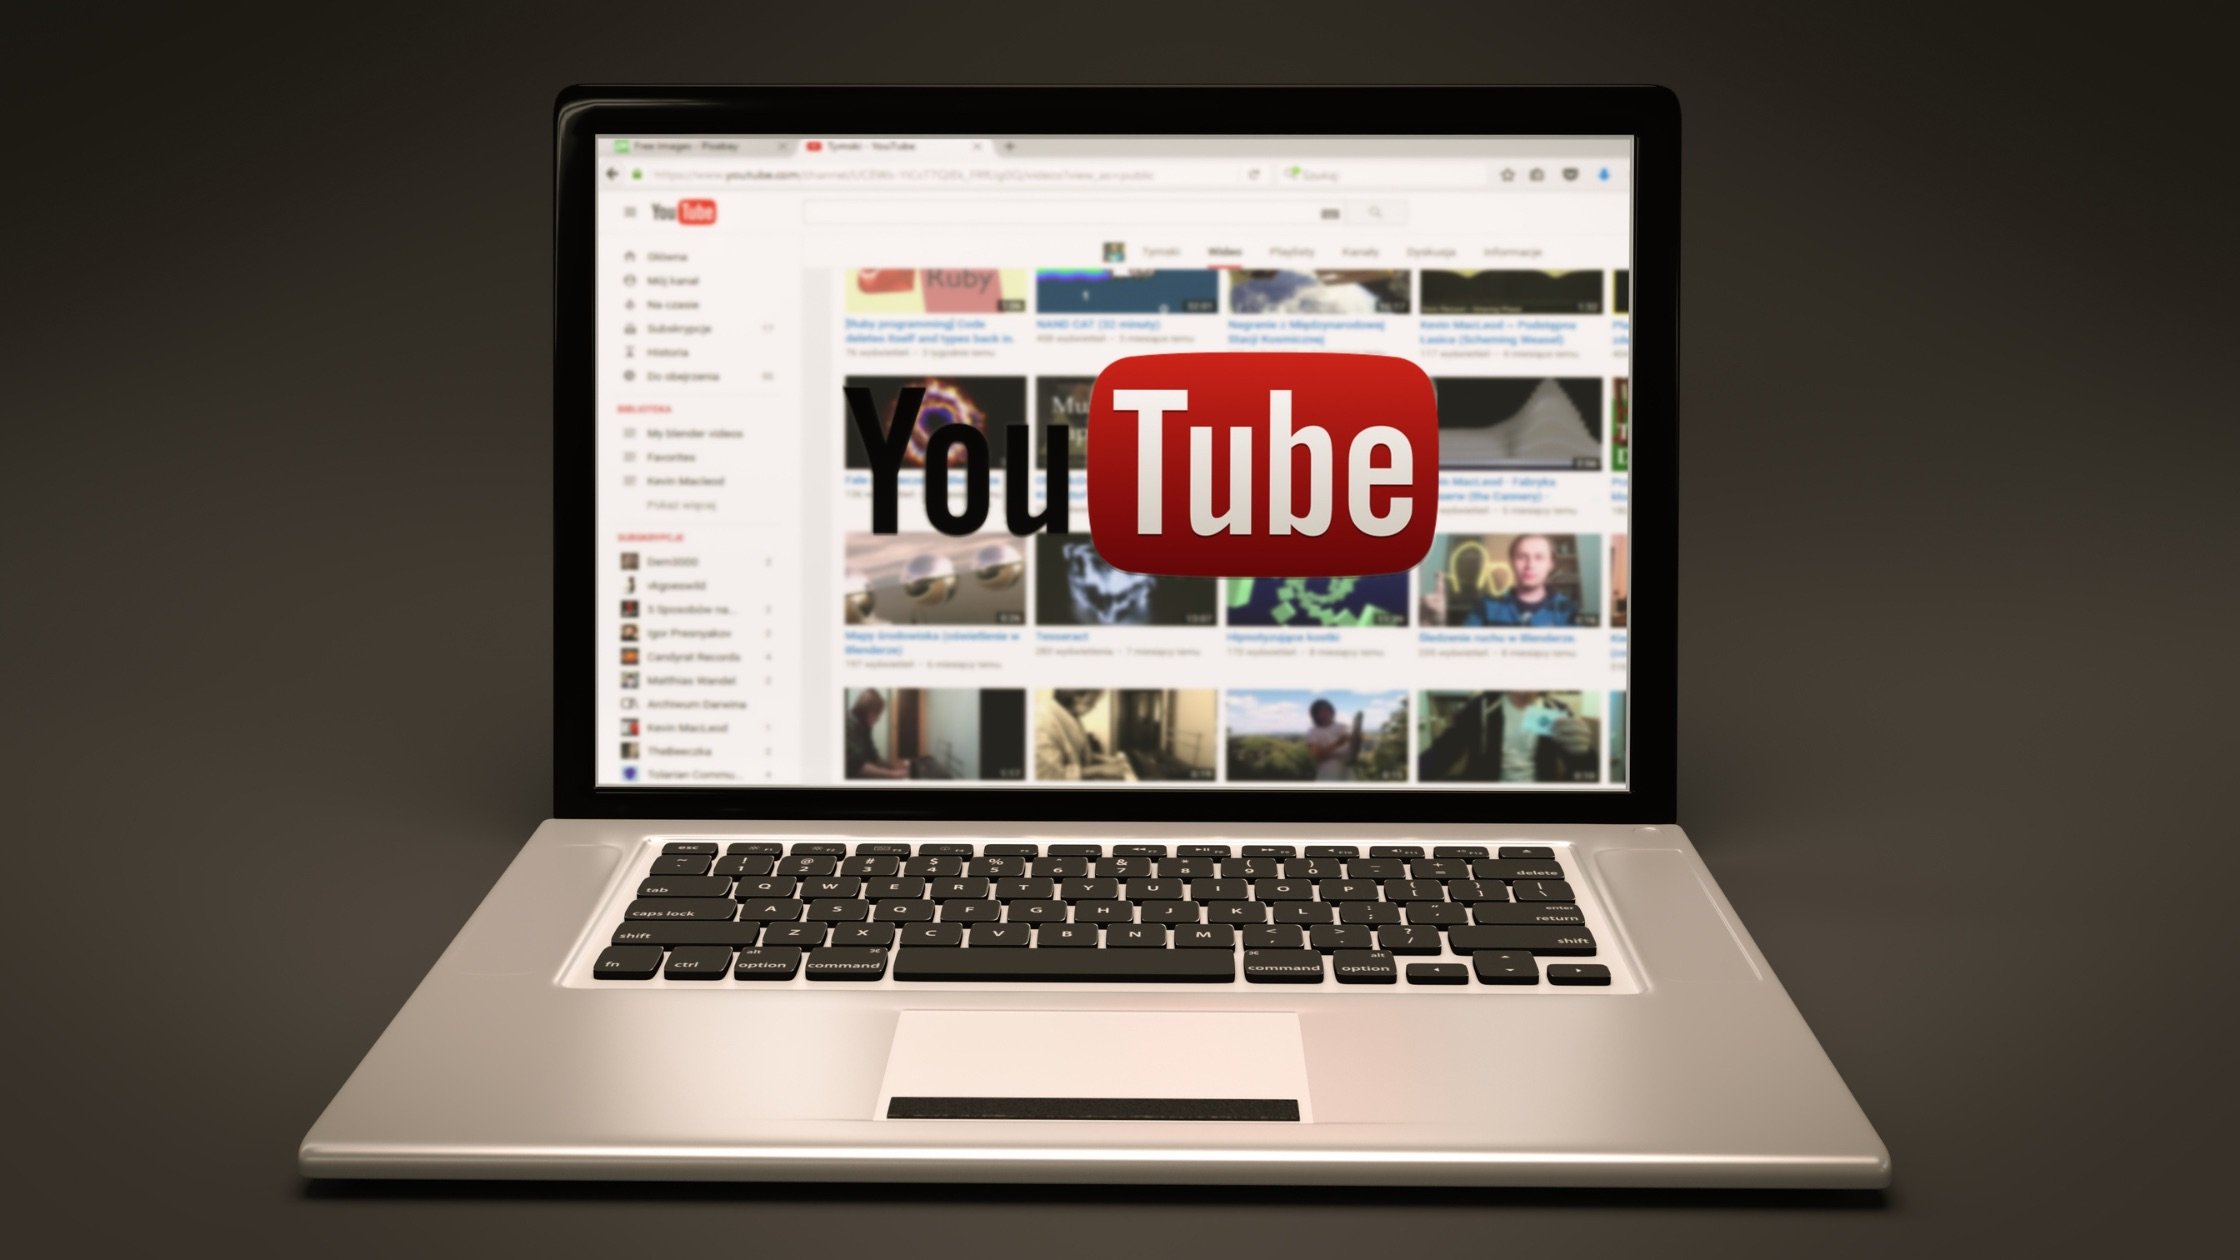 Can Product-Led Brands Monetize a YouTube Channel?